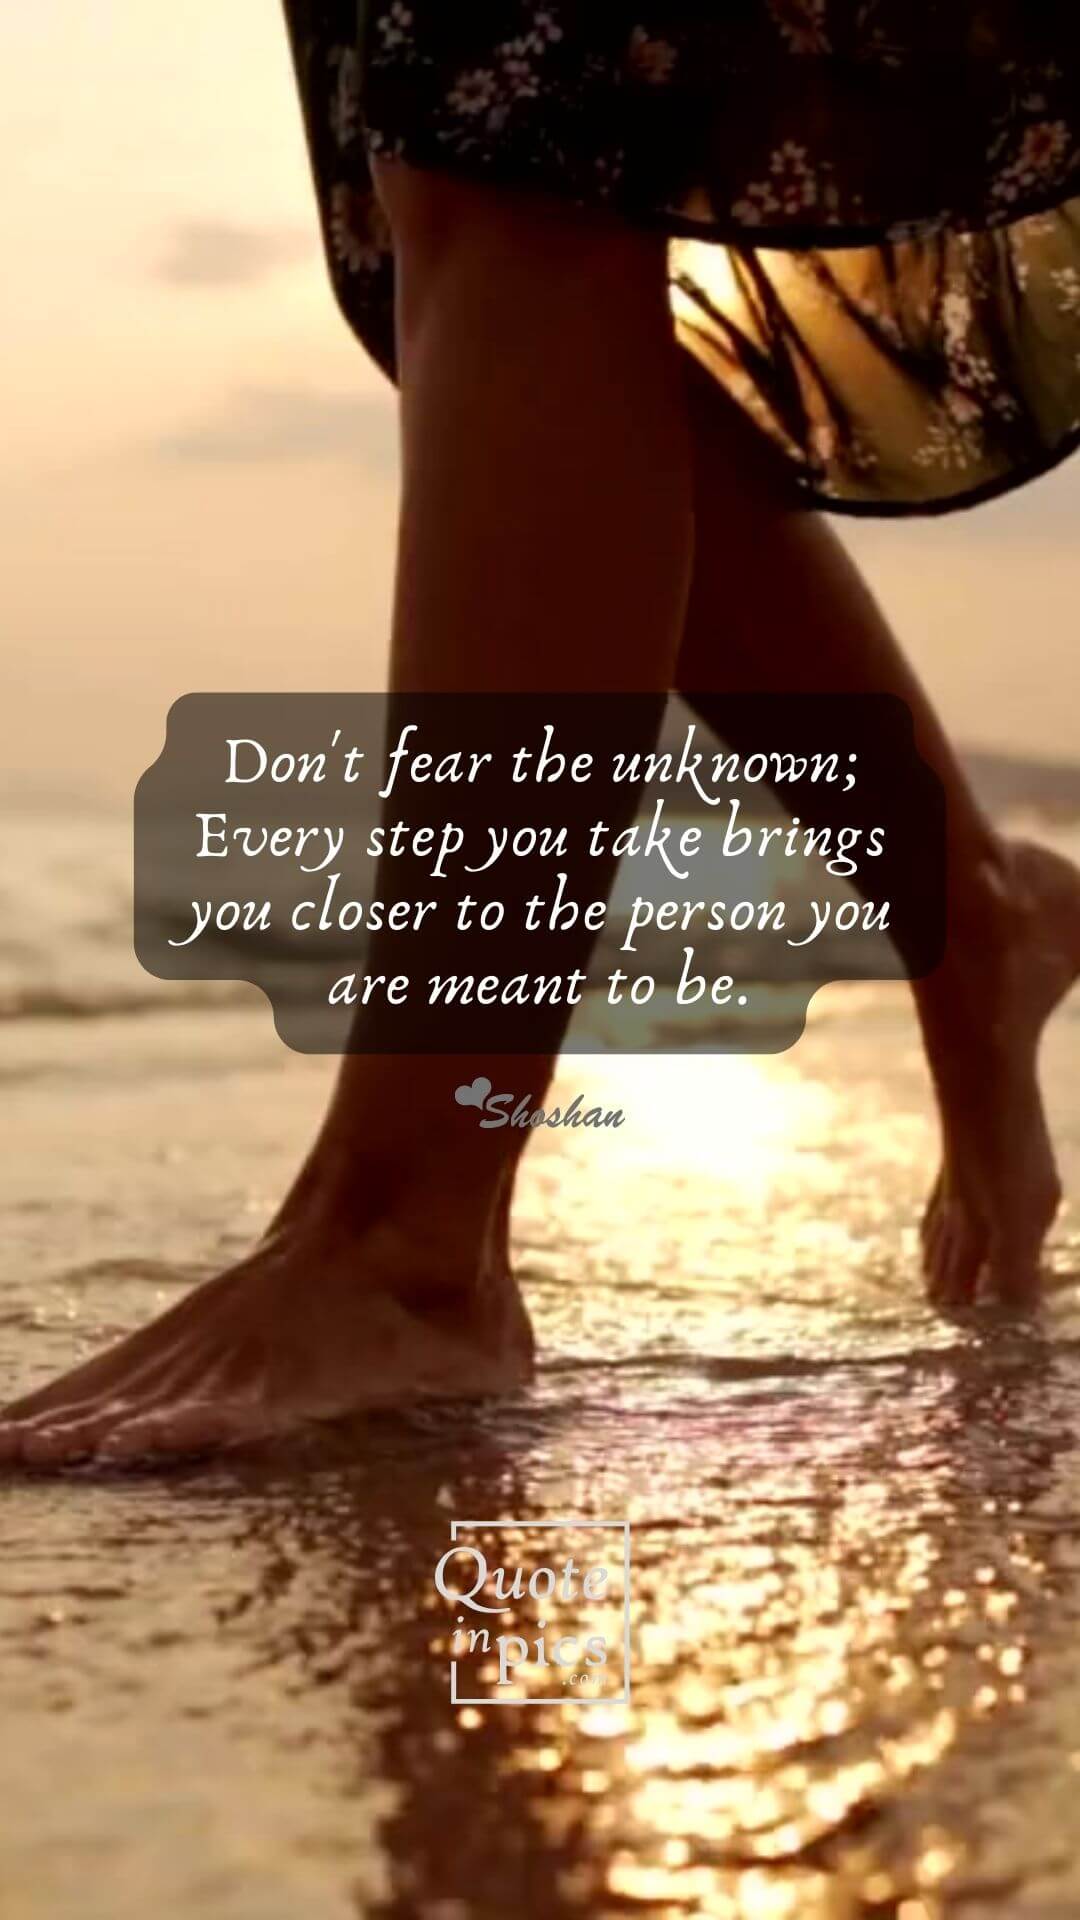 Overcoming fear of the unknown